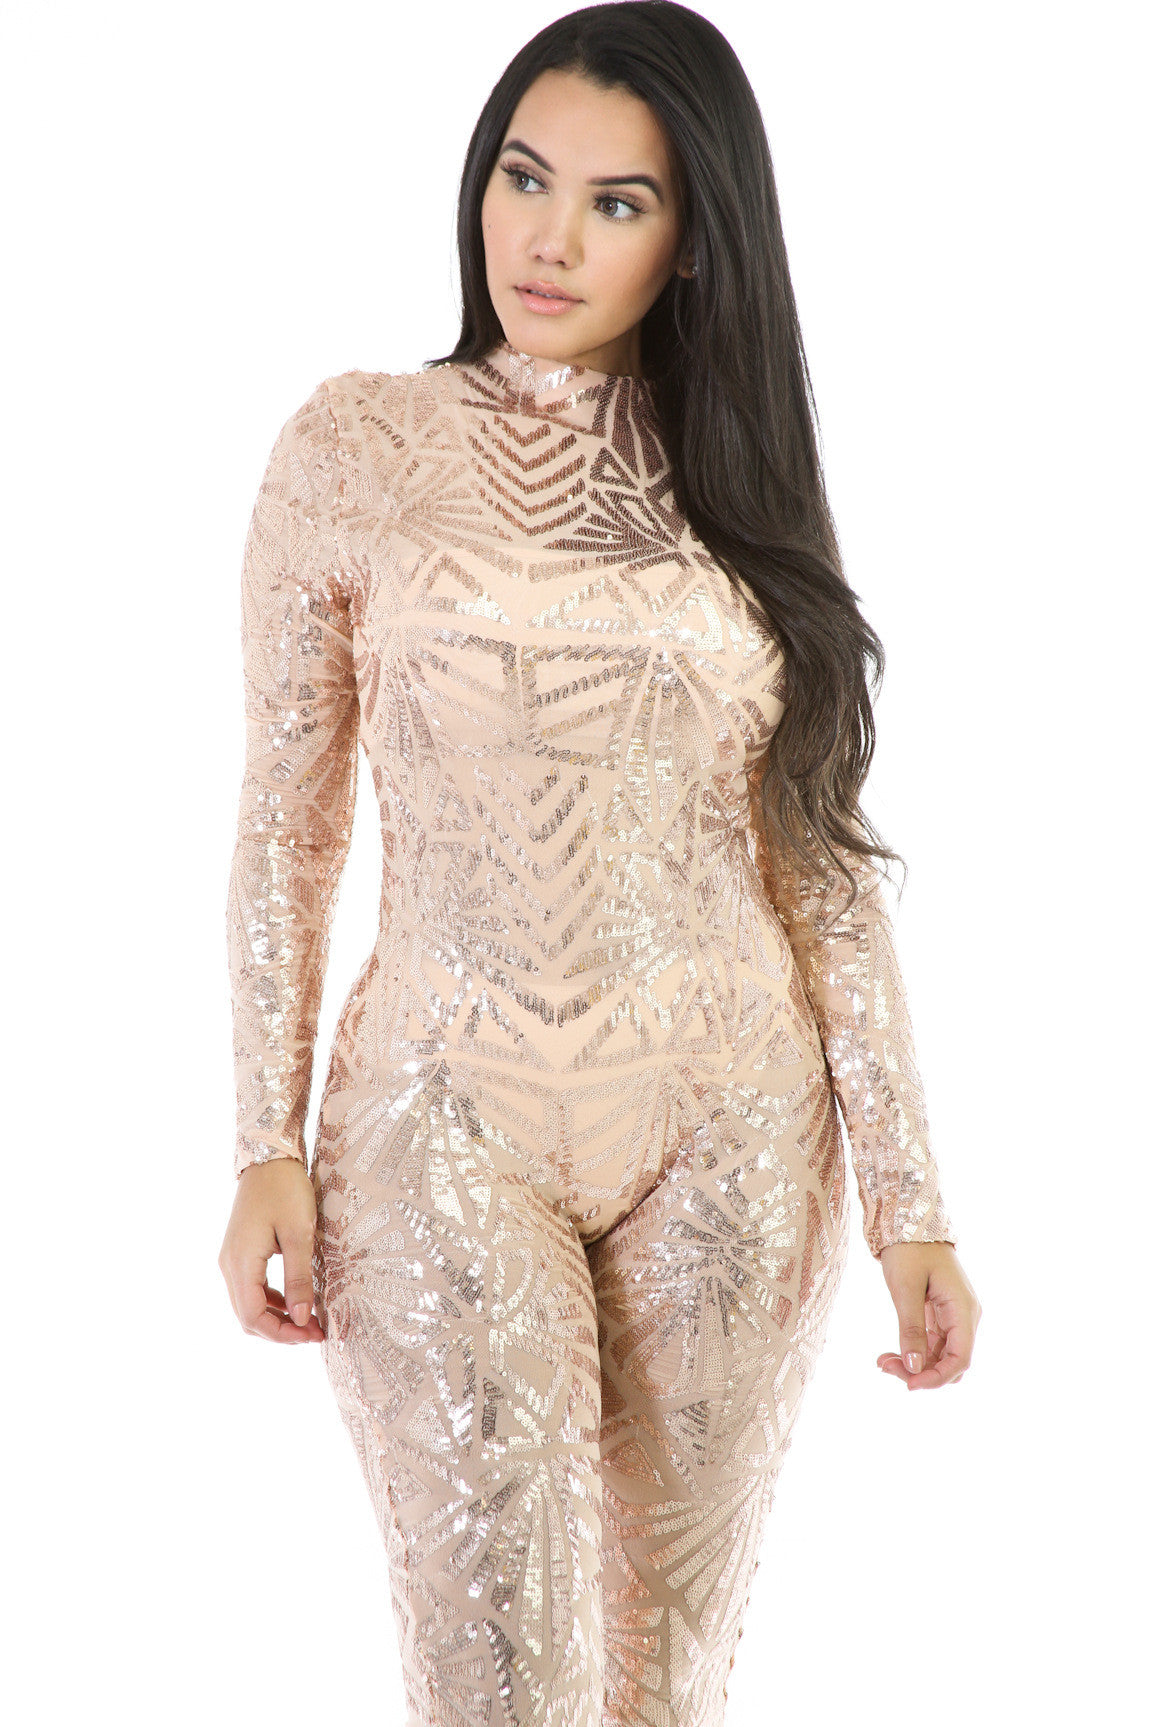 Sequins Long Sleeve High Neck See-Through Club Long Jumpsuit